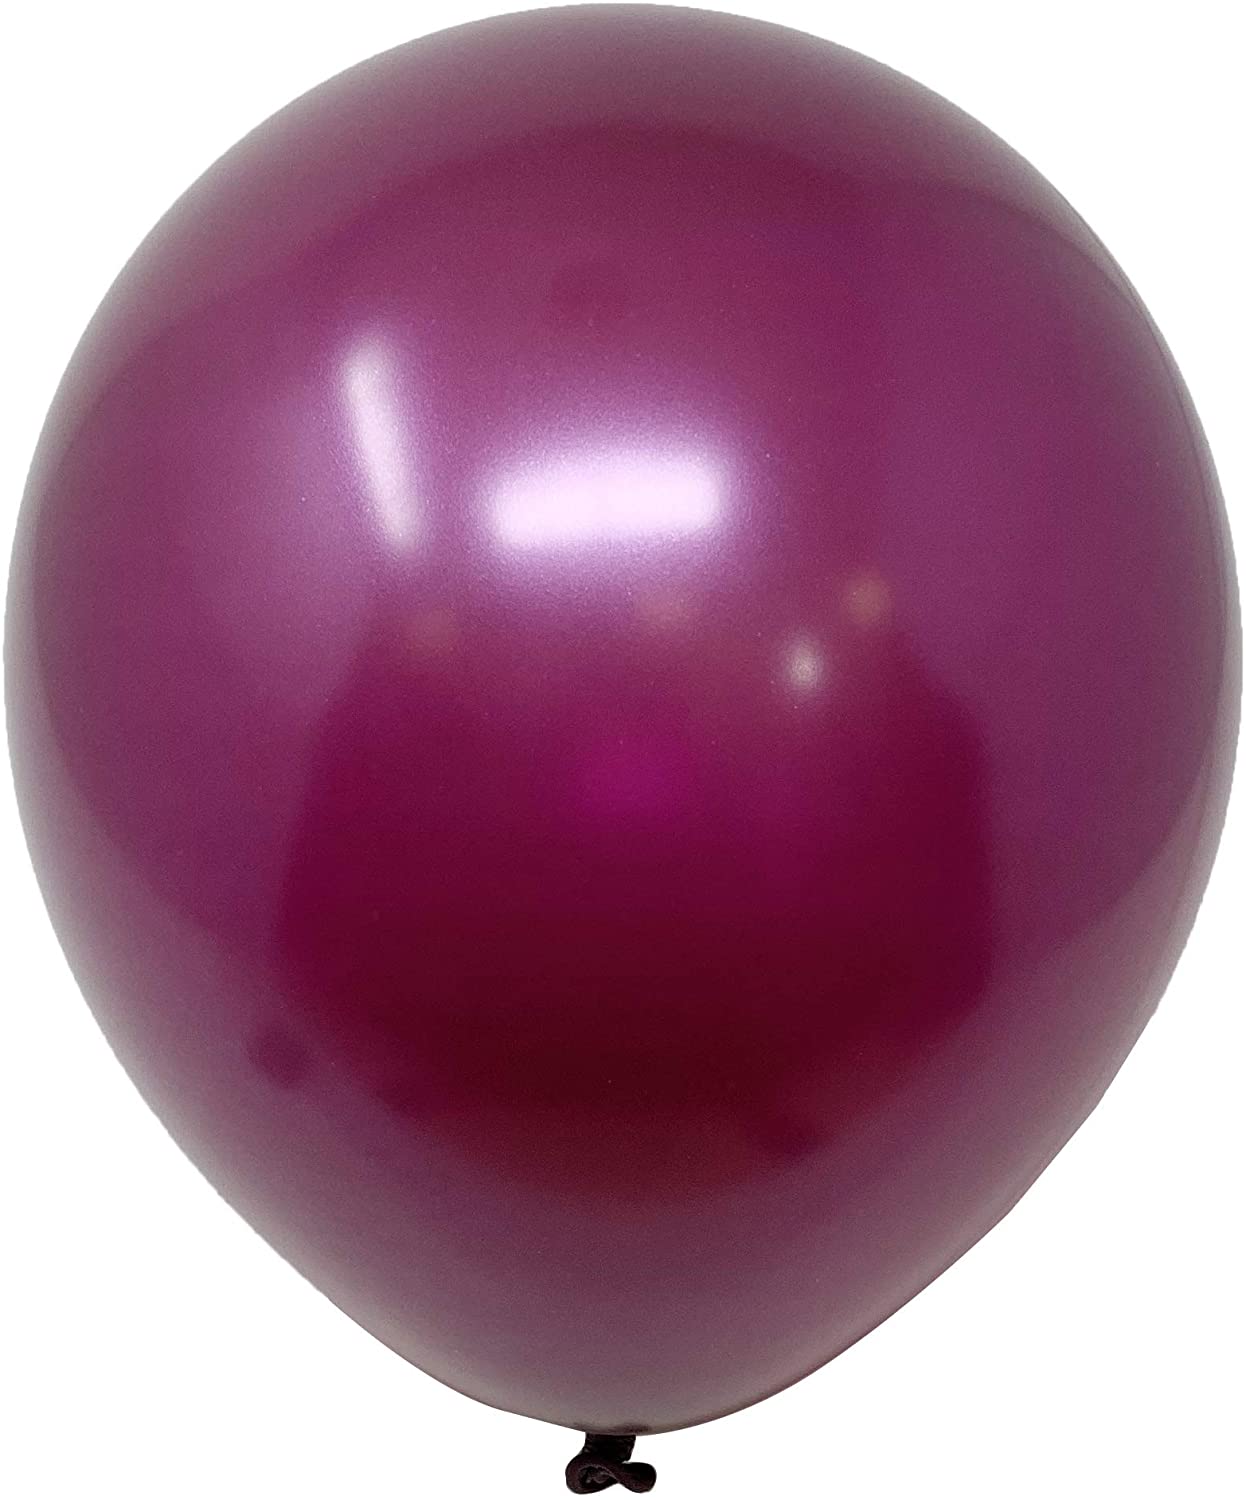 Burgundy latex balloon for sale online delivery in Dubai